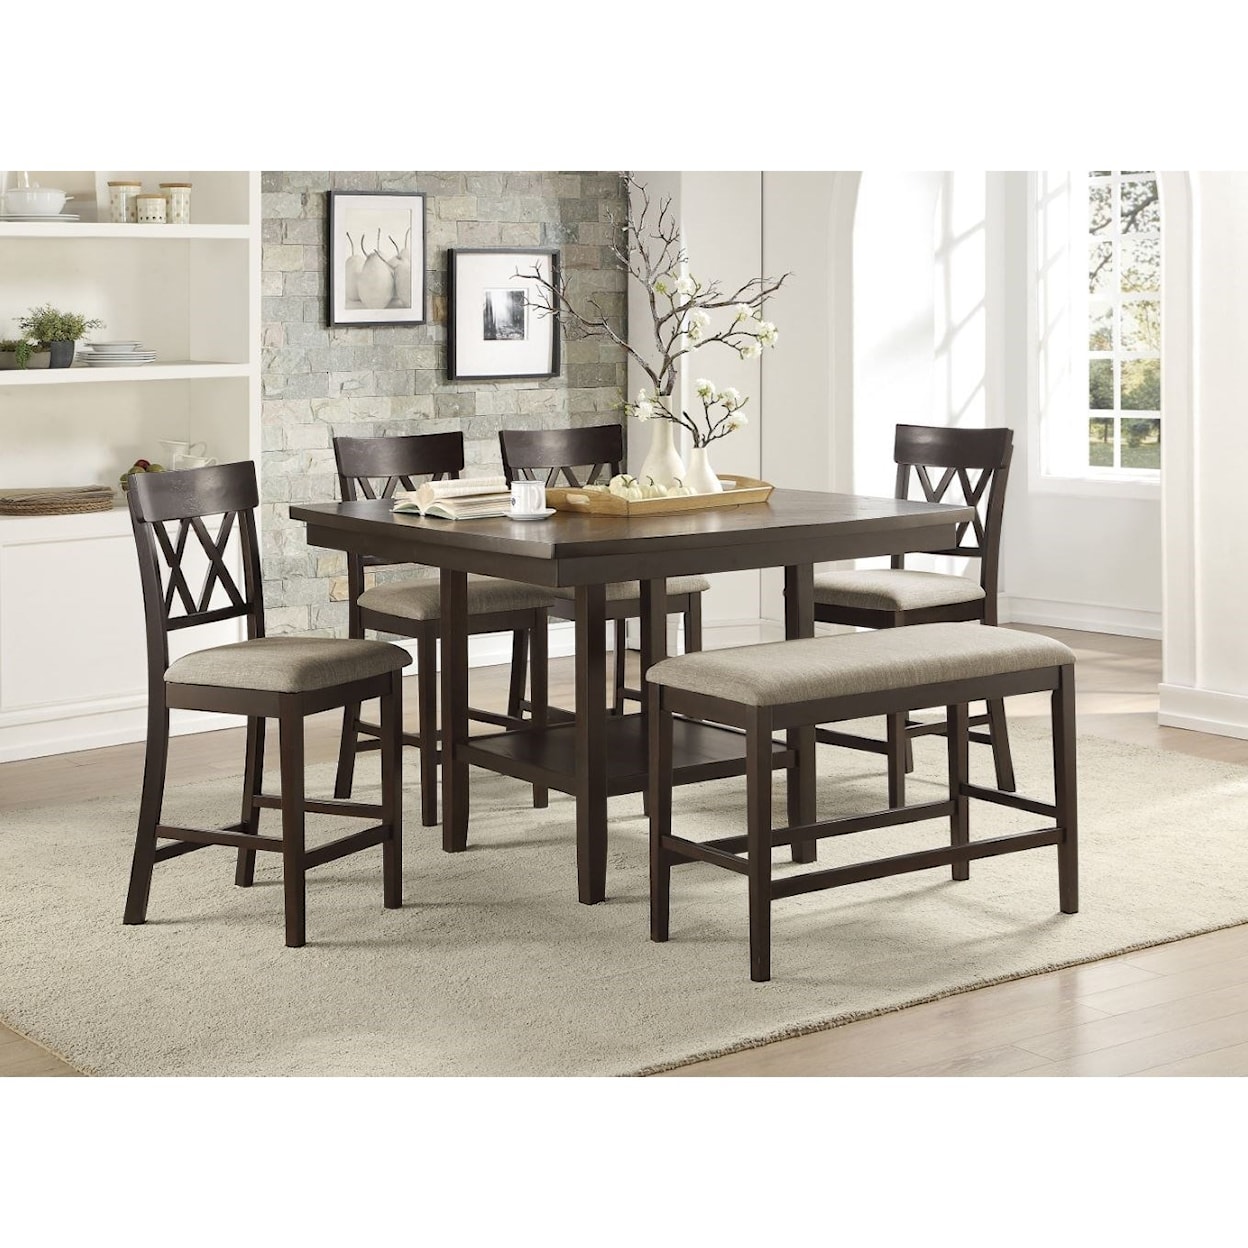 Homelegance Balin 6-Piece Counter Height Table and Chair Set